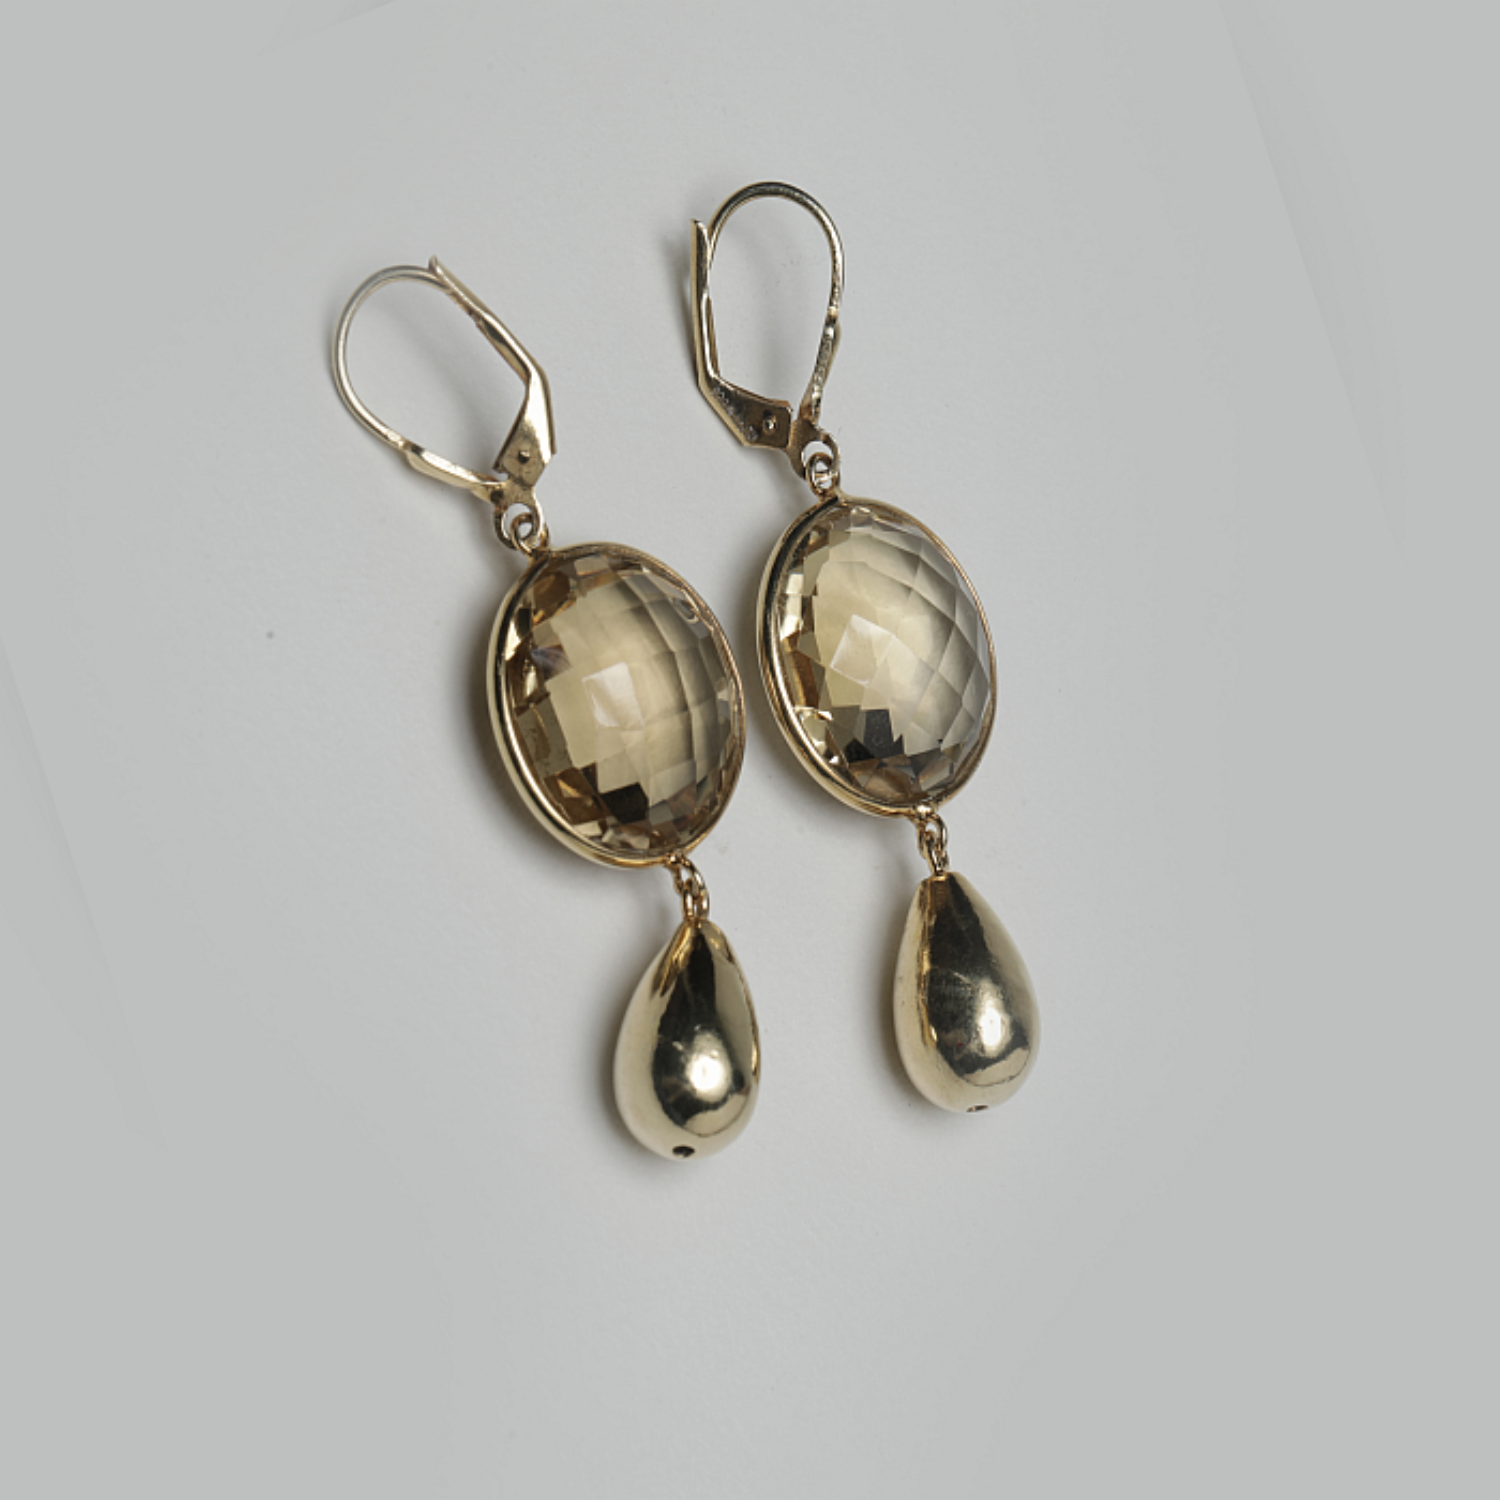 Blisse Allure 925 Sterling Citrine with Gold Finish Semi Precious Silver Earrings